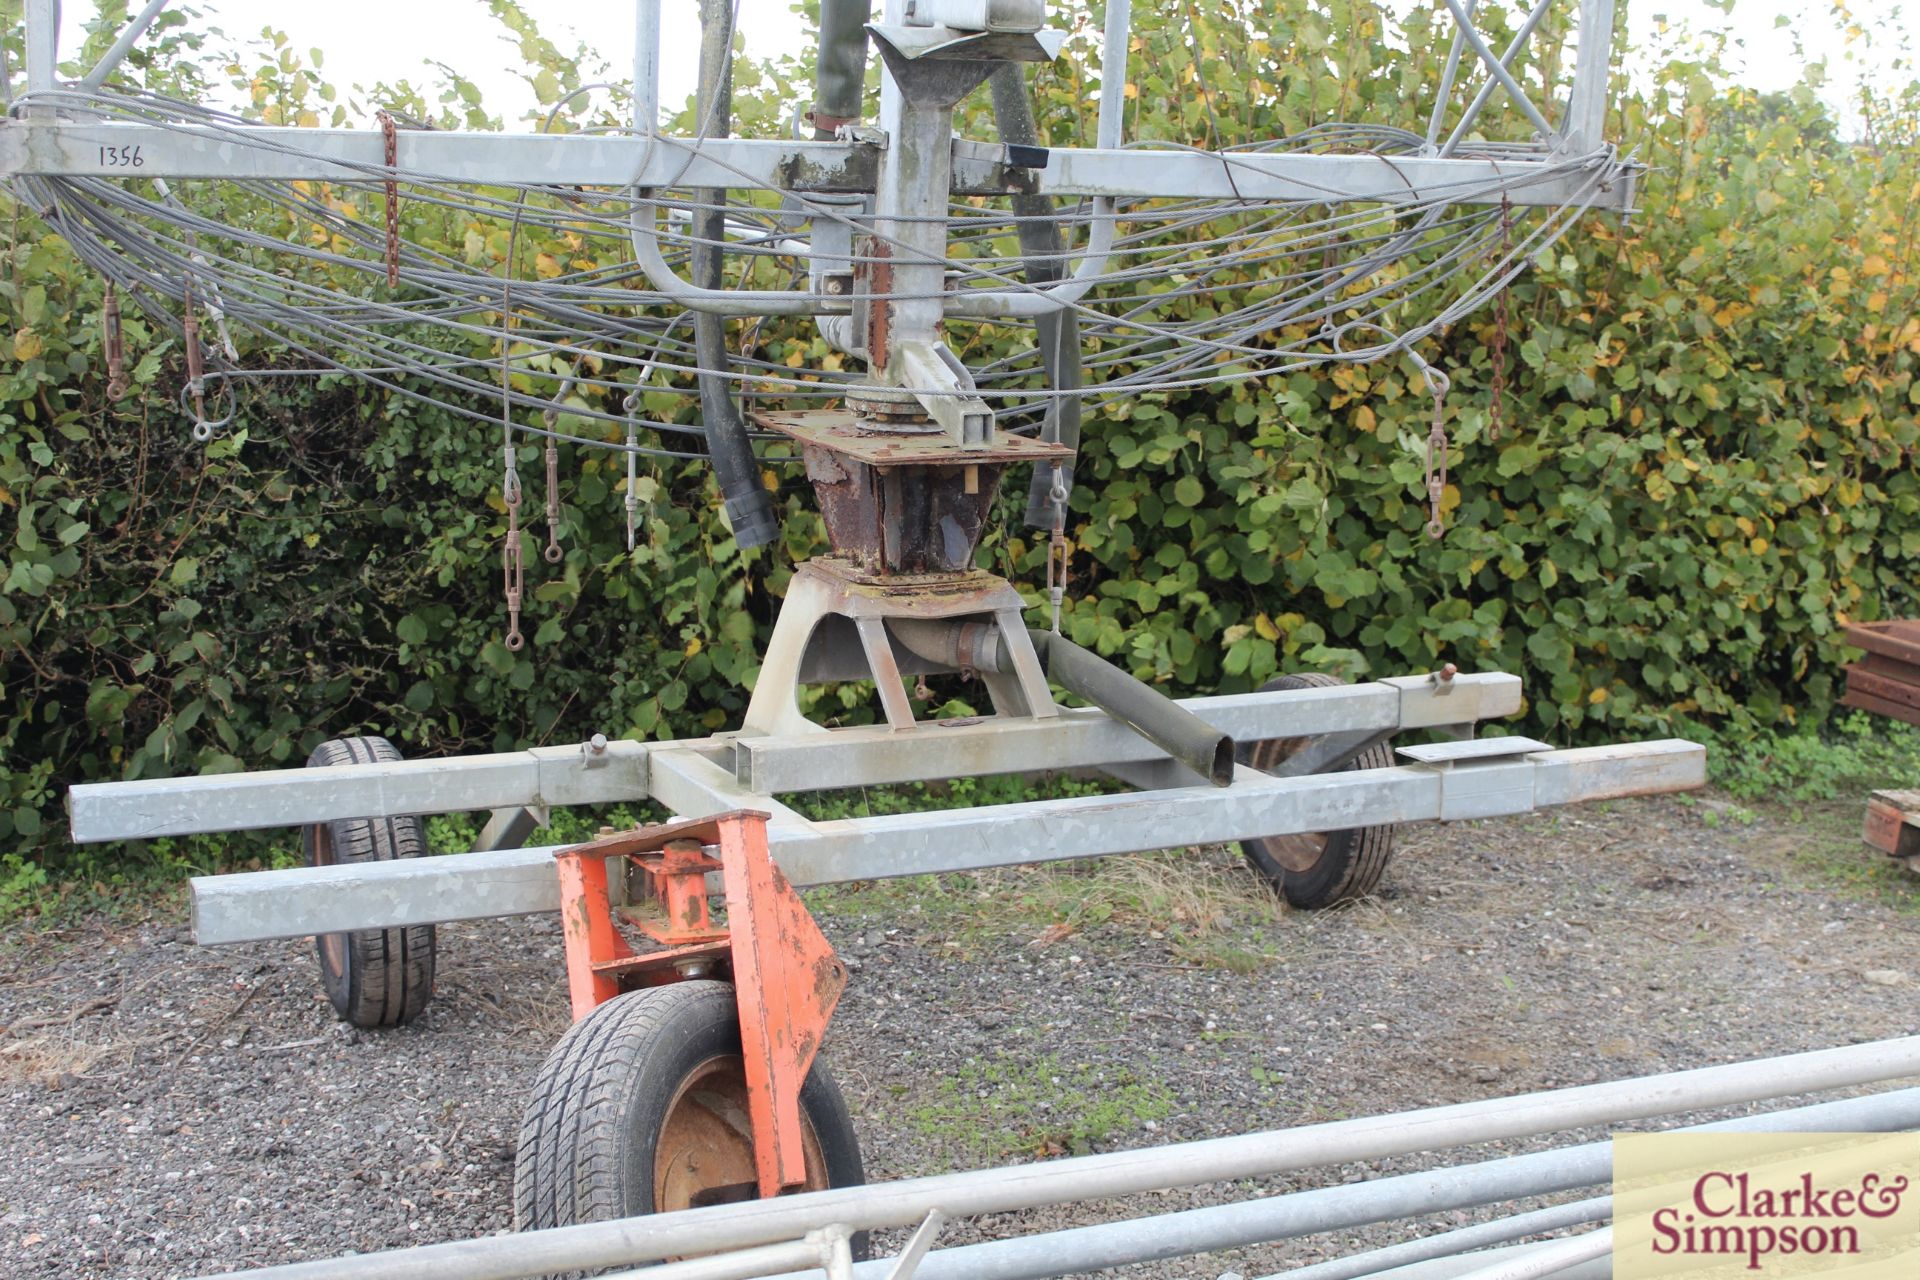 Bauer 64m spray boom irrigator. With 140 rain gun and further full boom section for spares. - Image 13 of 13